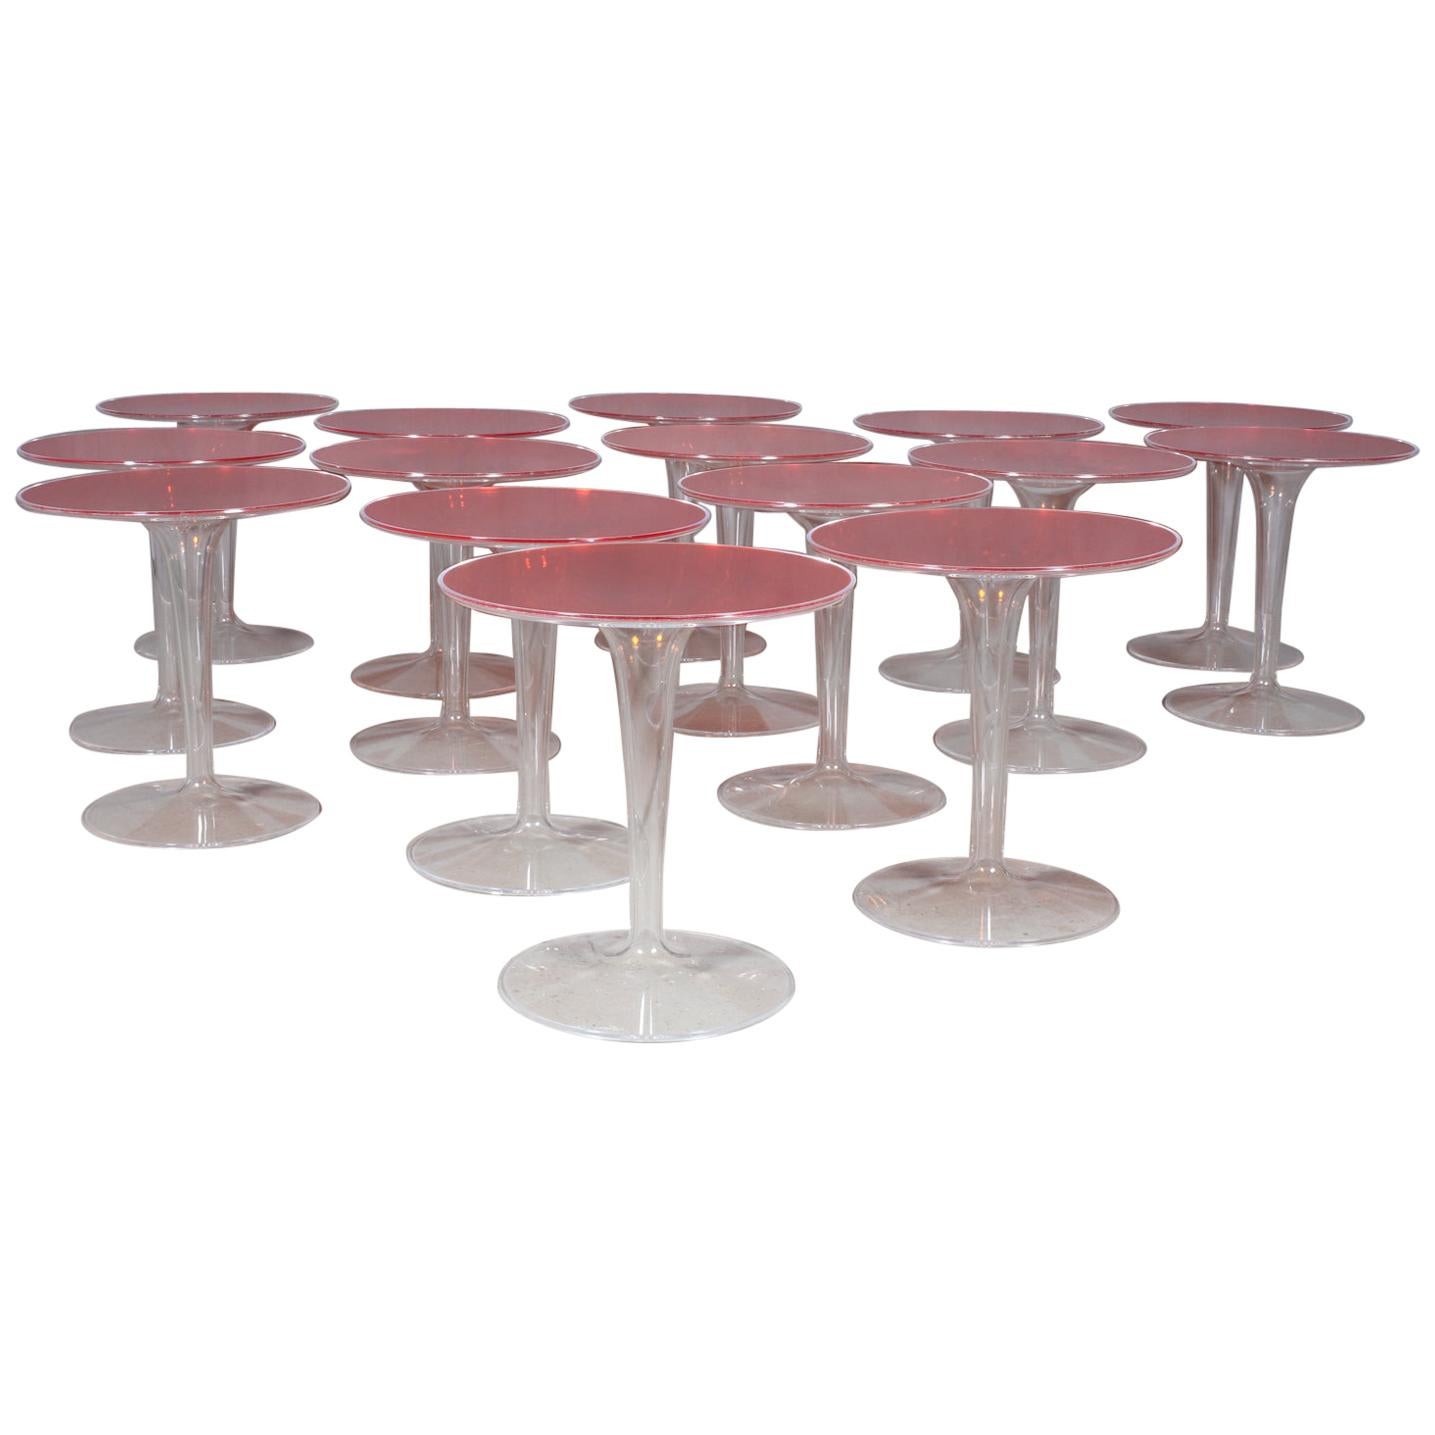 Philippe Starck and Eugeni Quitllet sidetables For Sale at 1stDibs